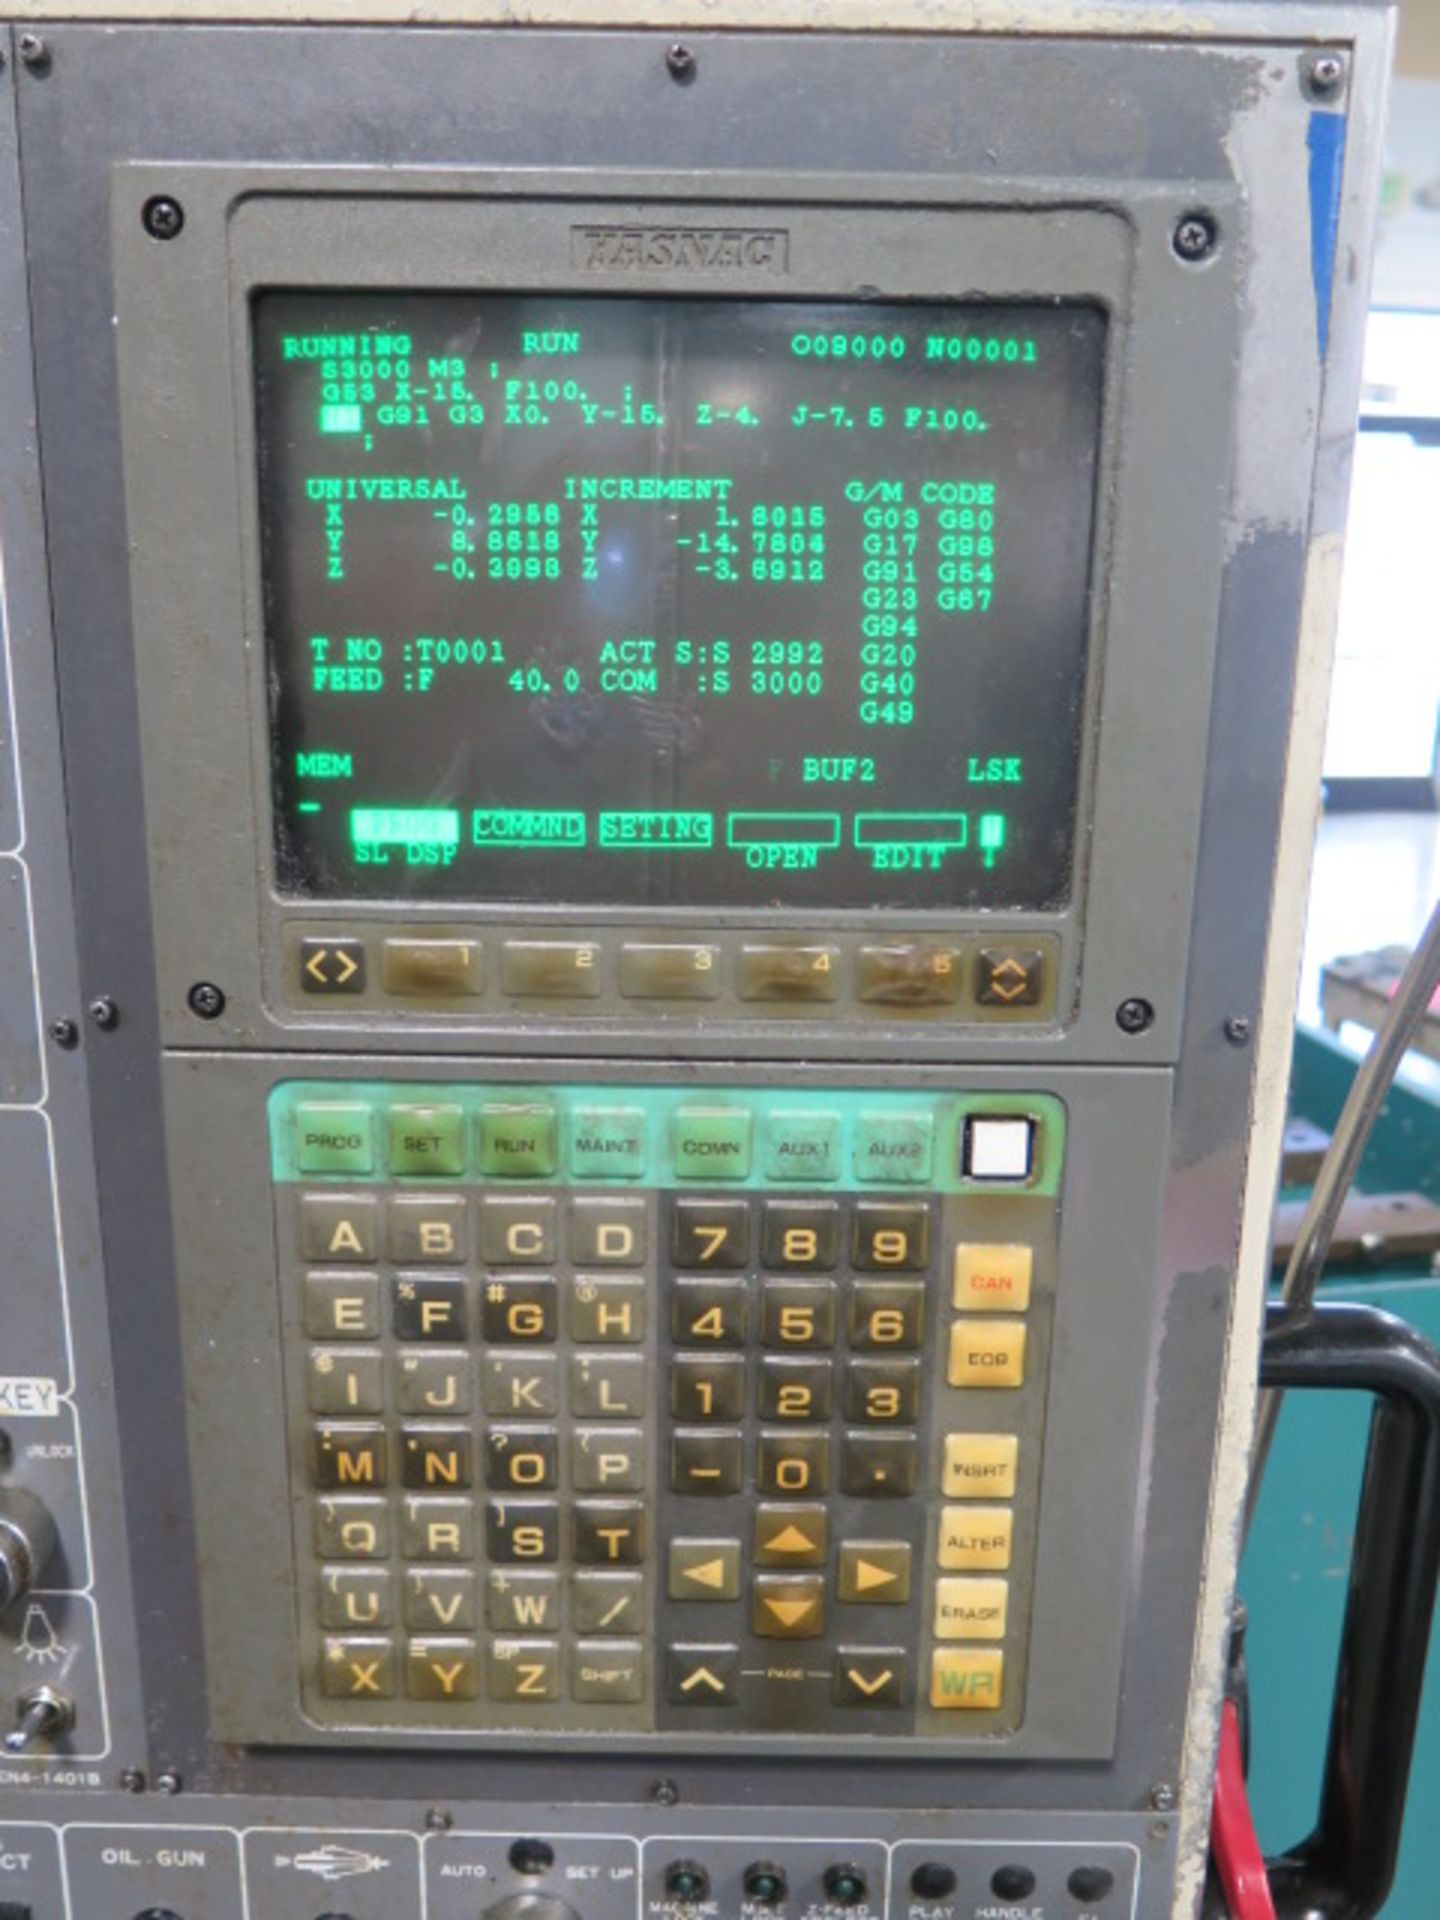 Matsuura RA-3F 2-Pallet CNC Vertical Machining Center s/n 930210424 w/ Yasnac i-80 Controls, Hand Wh - Image 6 of 20